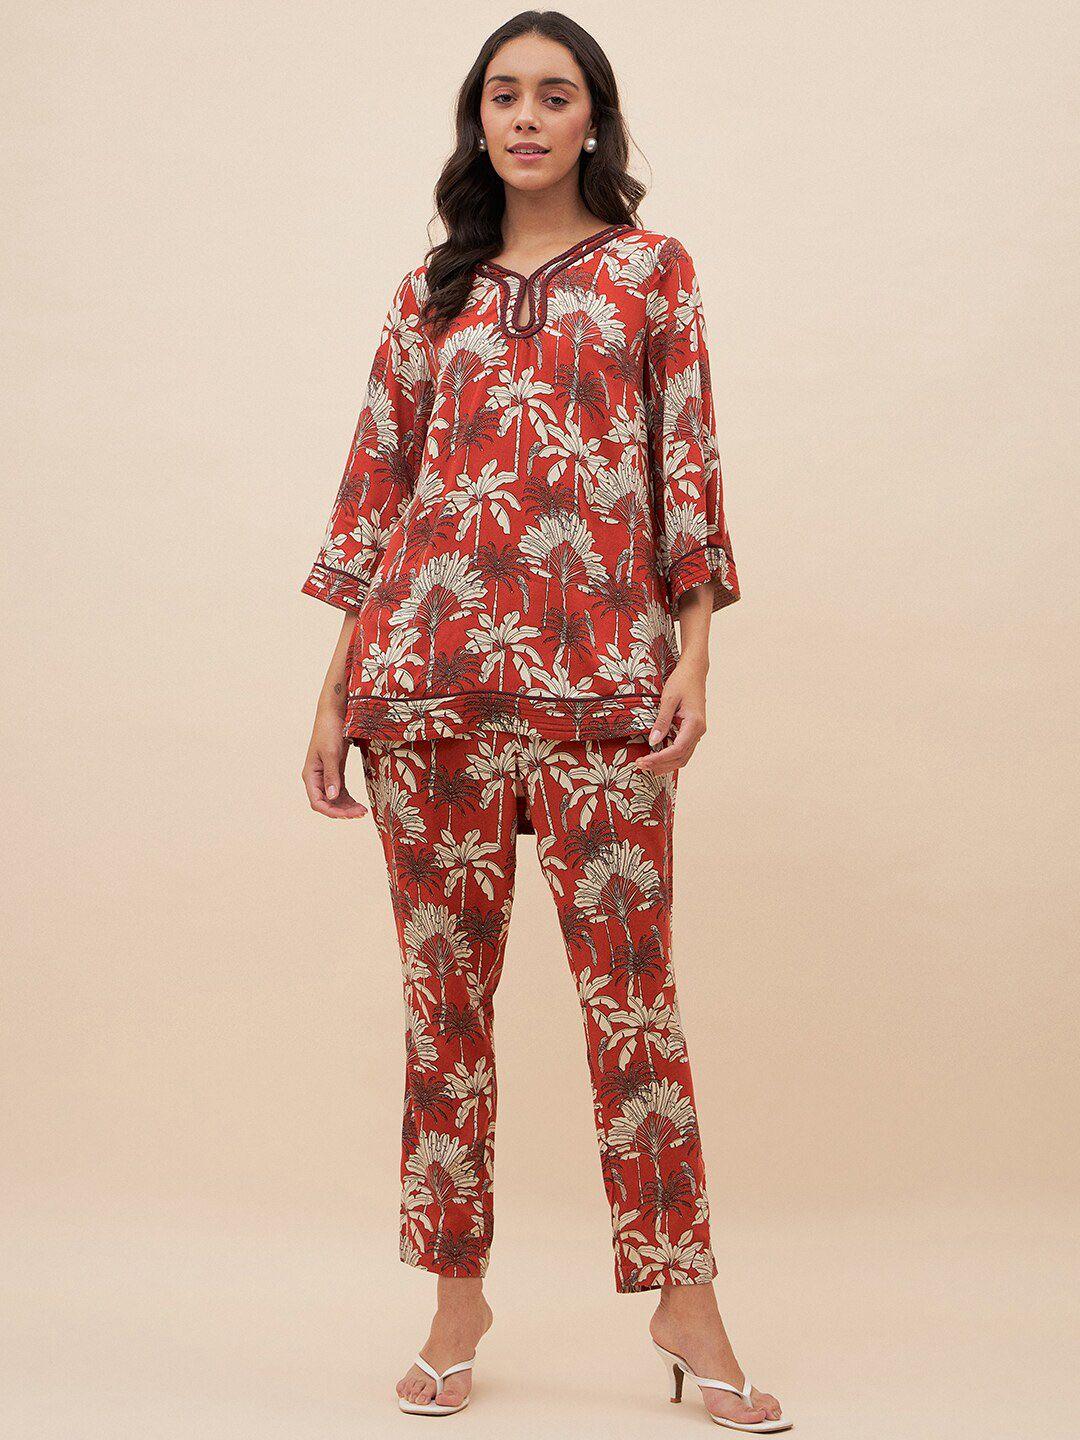 femella palm printed braided keyhole neck top & trousers